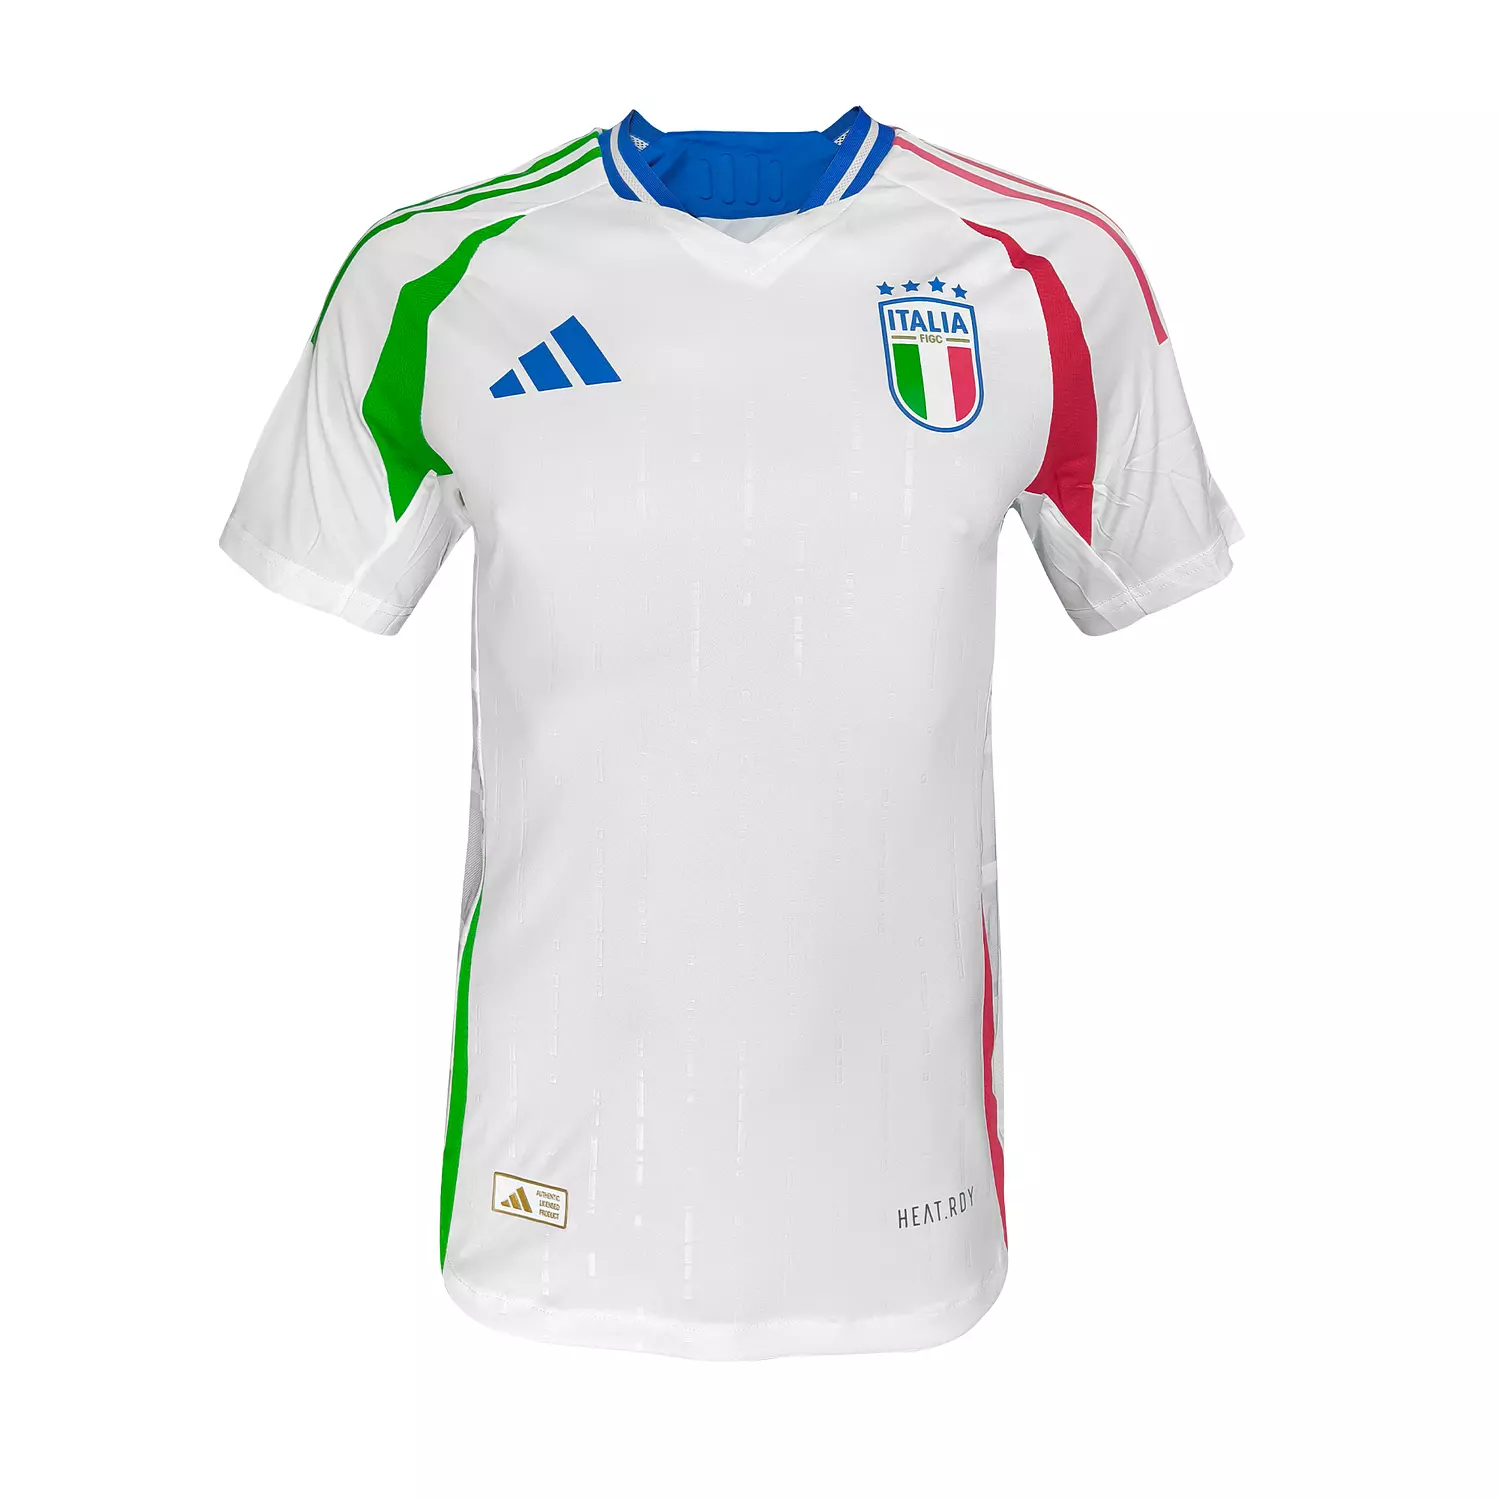 ITALY EURO 24 PLAYER - NATIONAL TEAM 1